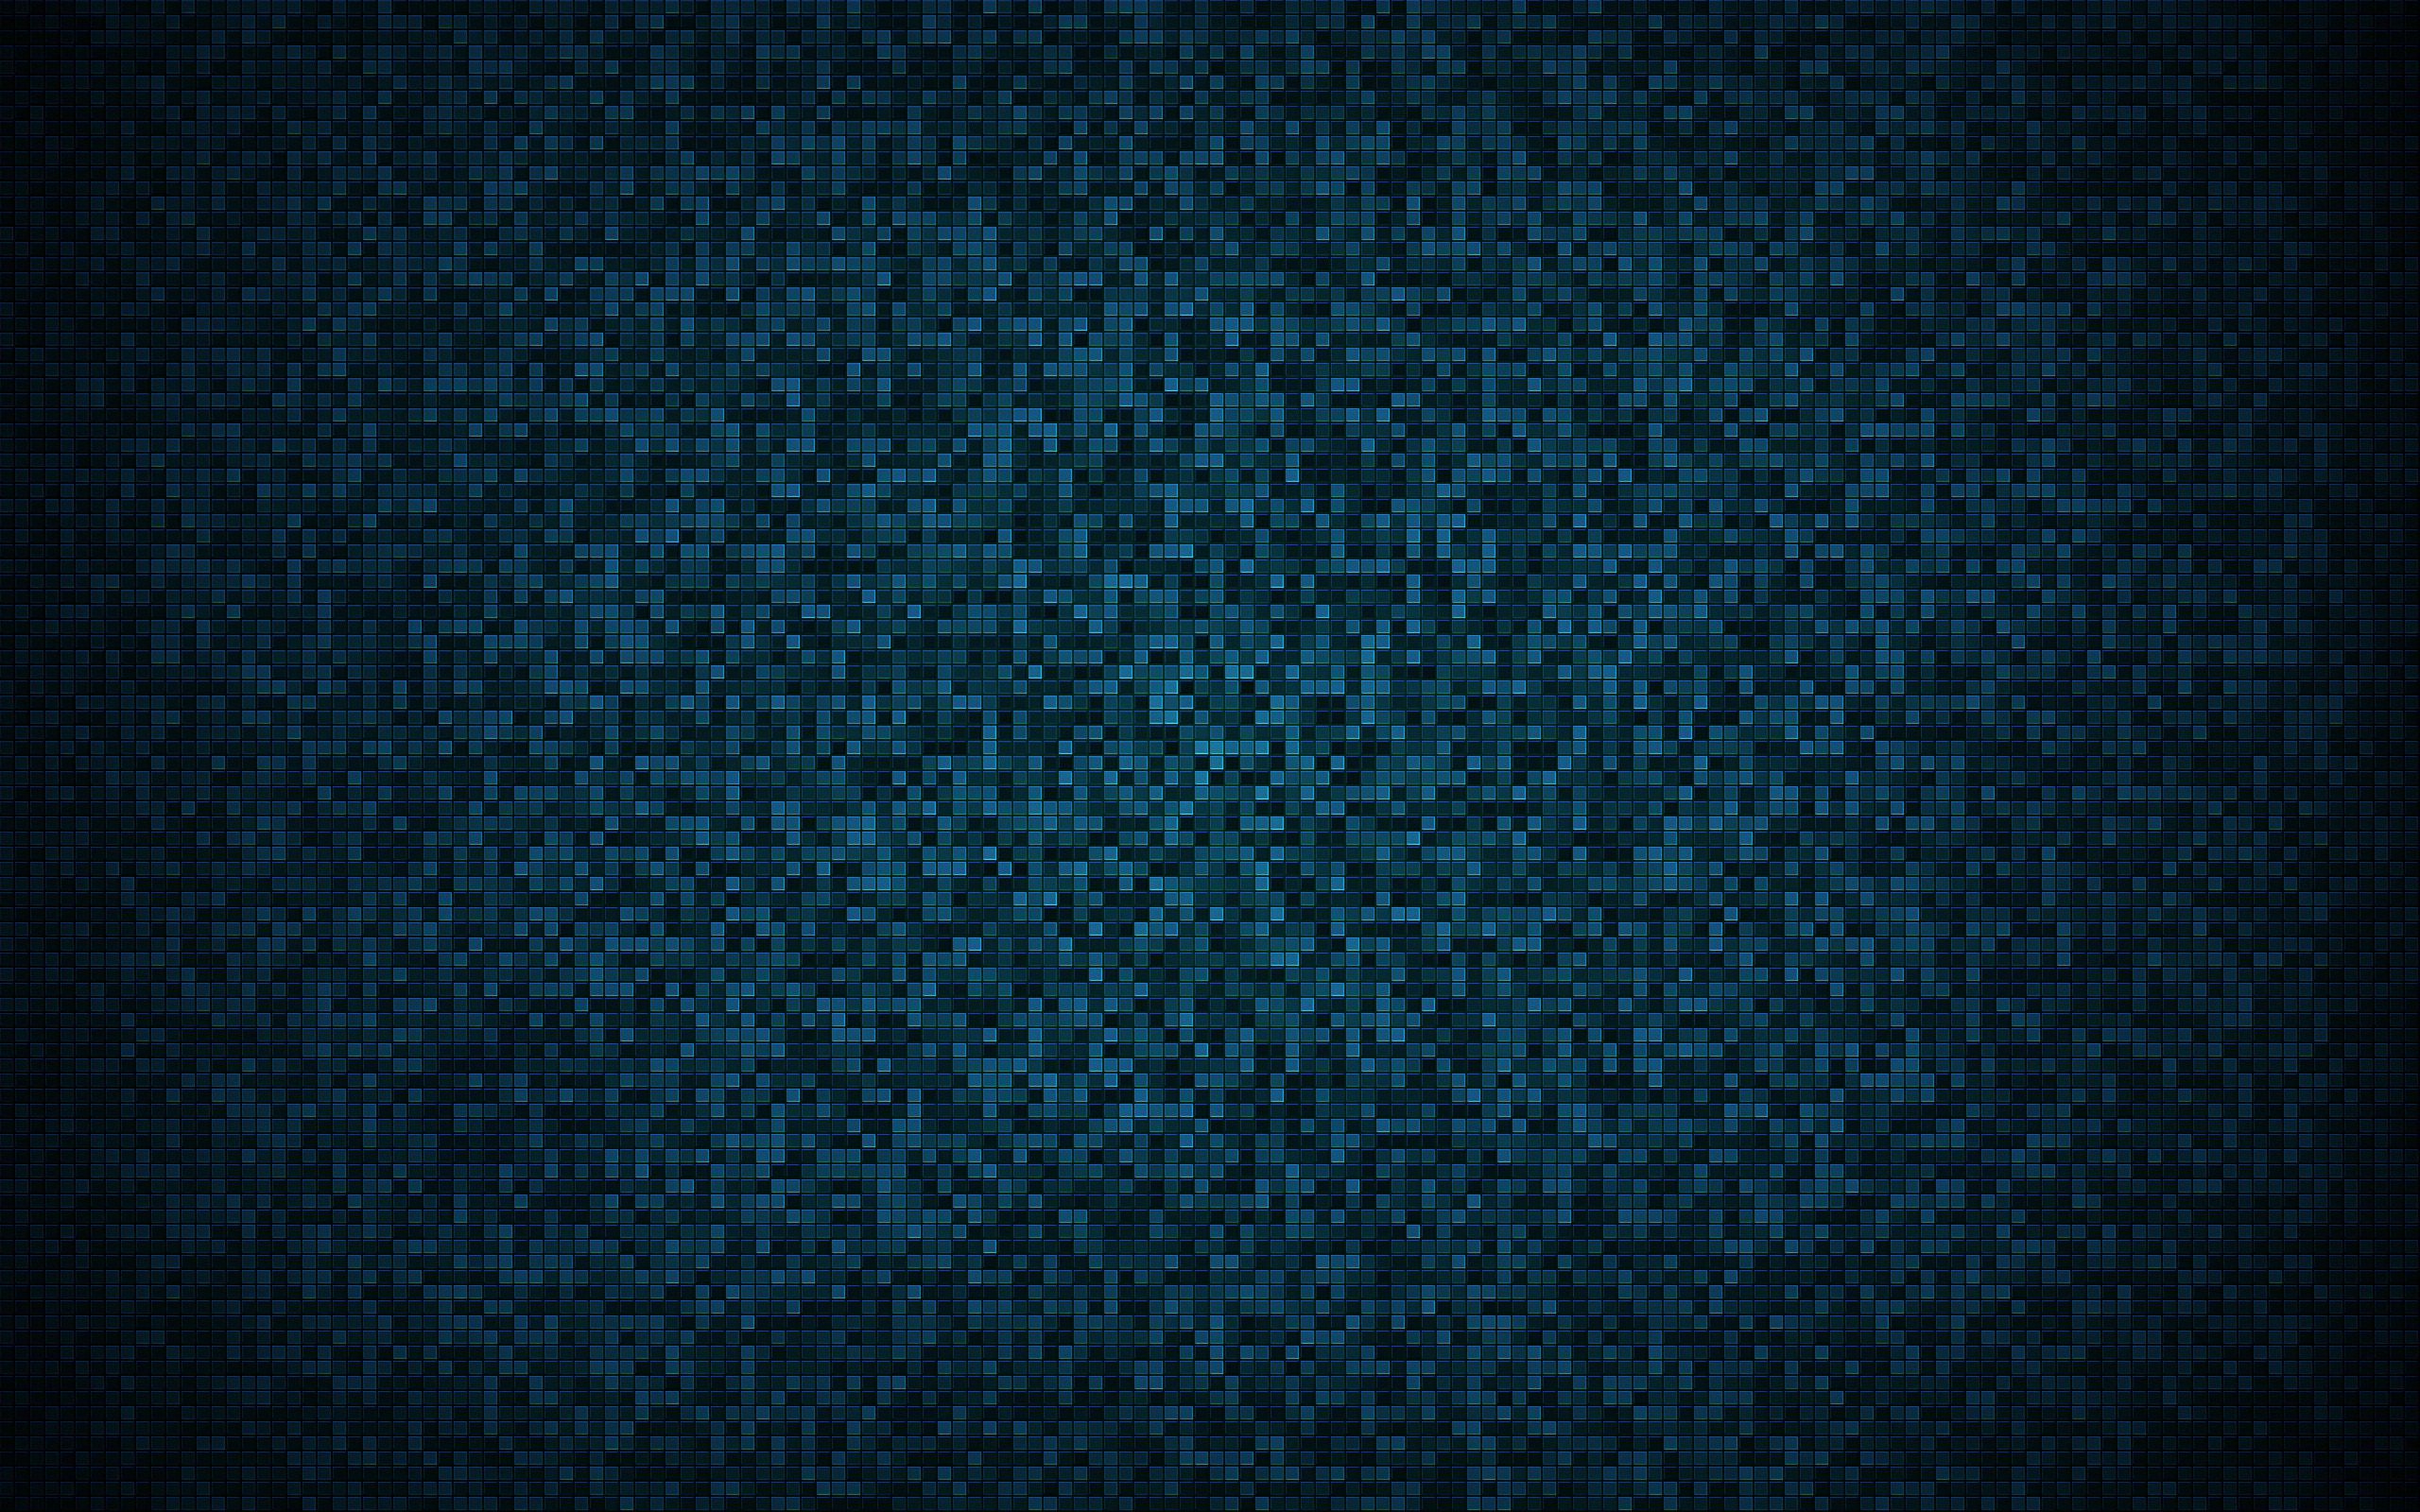 Download wallpaper blue pixel texture, blue squares texture, pixel background, blue small tile texture, creative blue background, blue abstract background for desktop with resolution 2560x1600. High Quality HD picture wallpaper